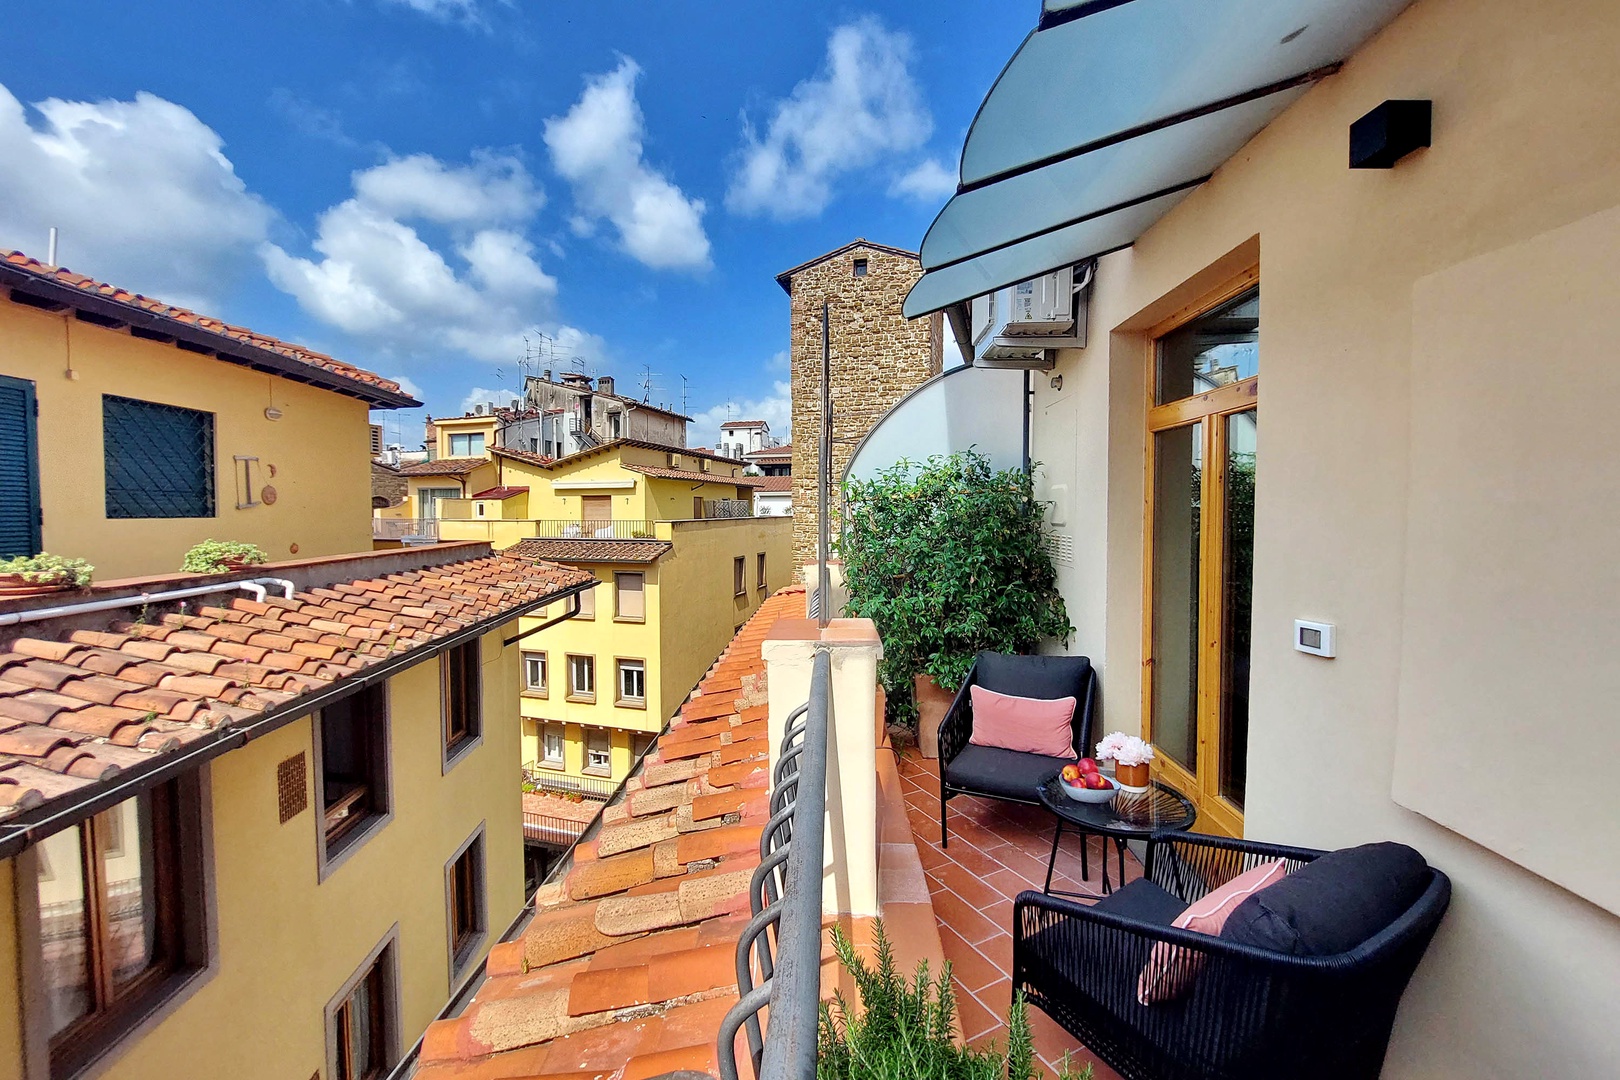 Lovely feature to have this outdoor space in Florence!